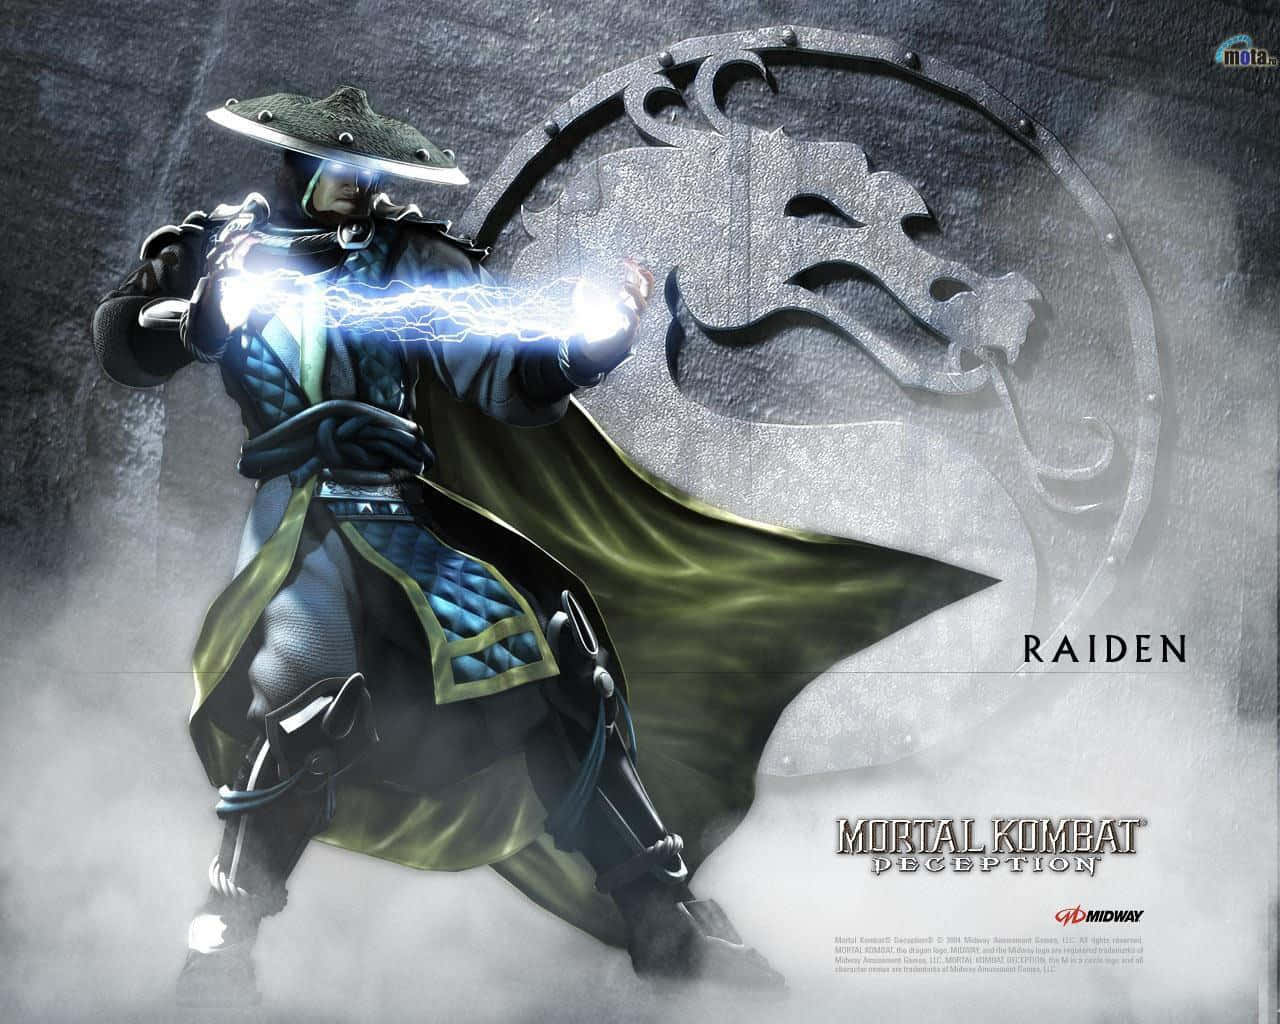 Raiden, the Thunder God, unleashes his mighty powers in Mortal Kombat Wallpaper